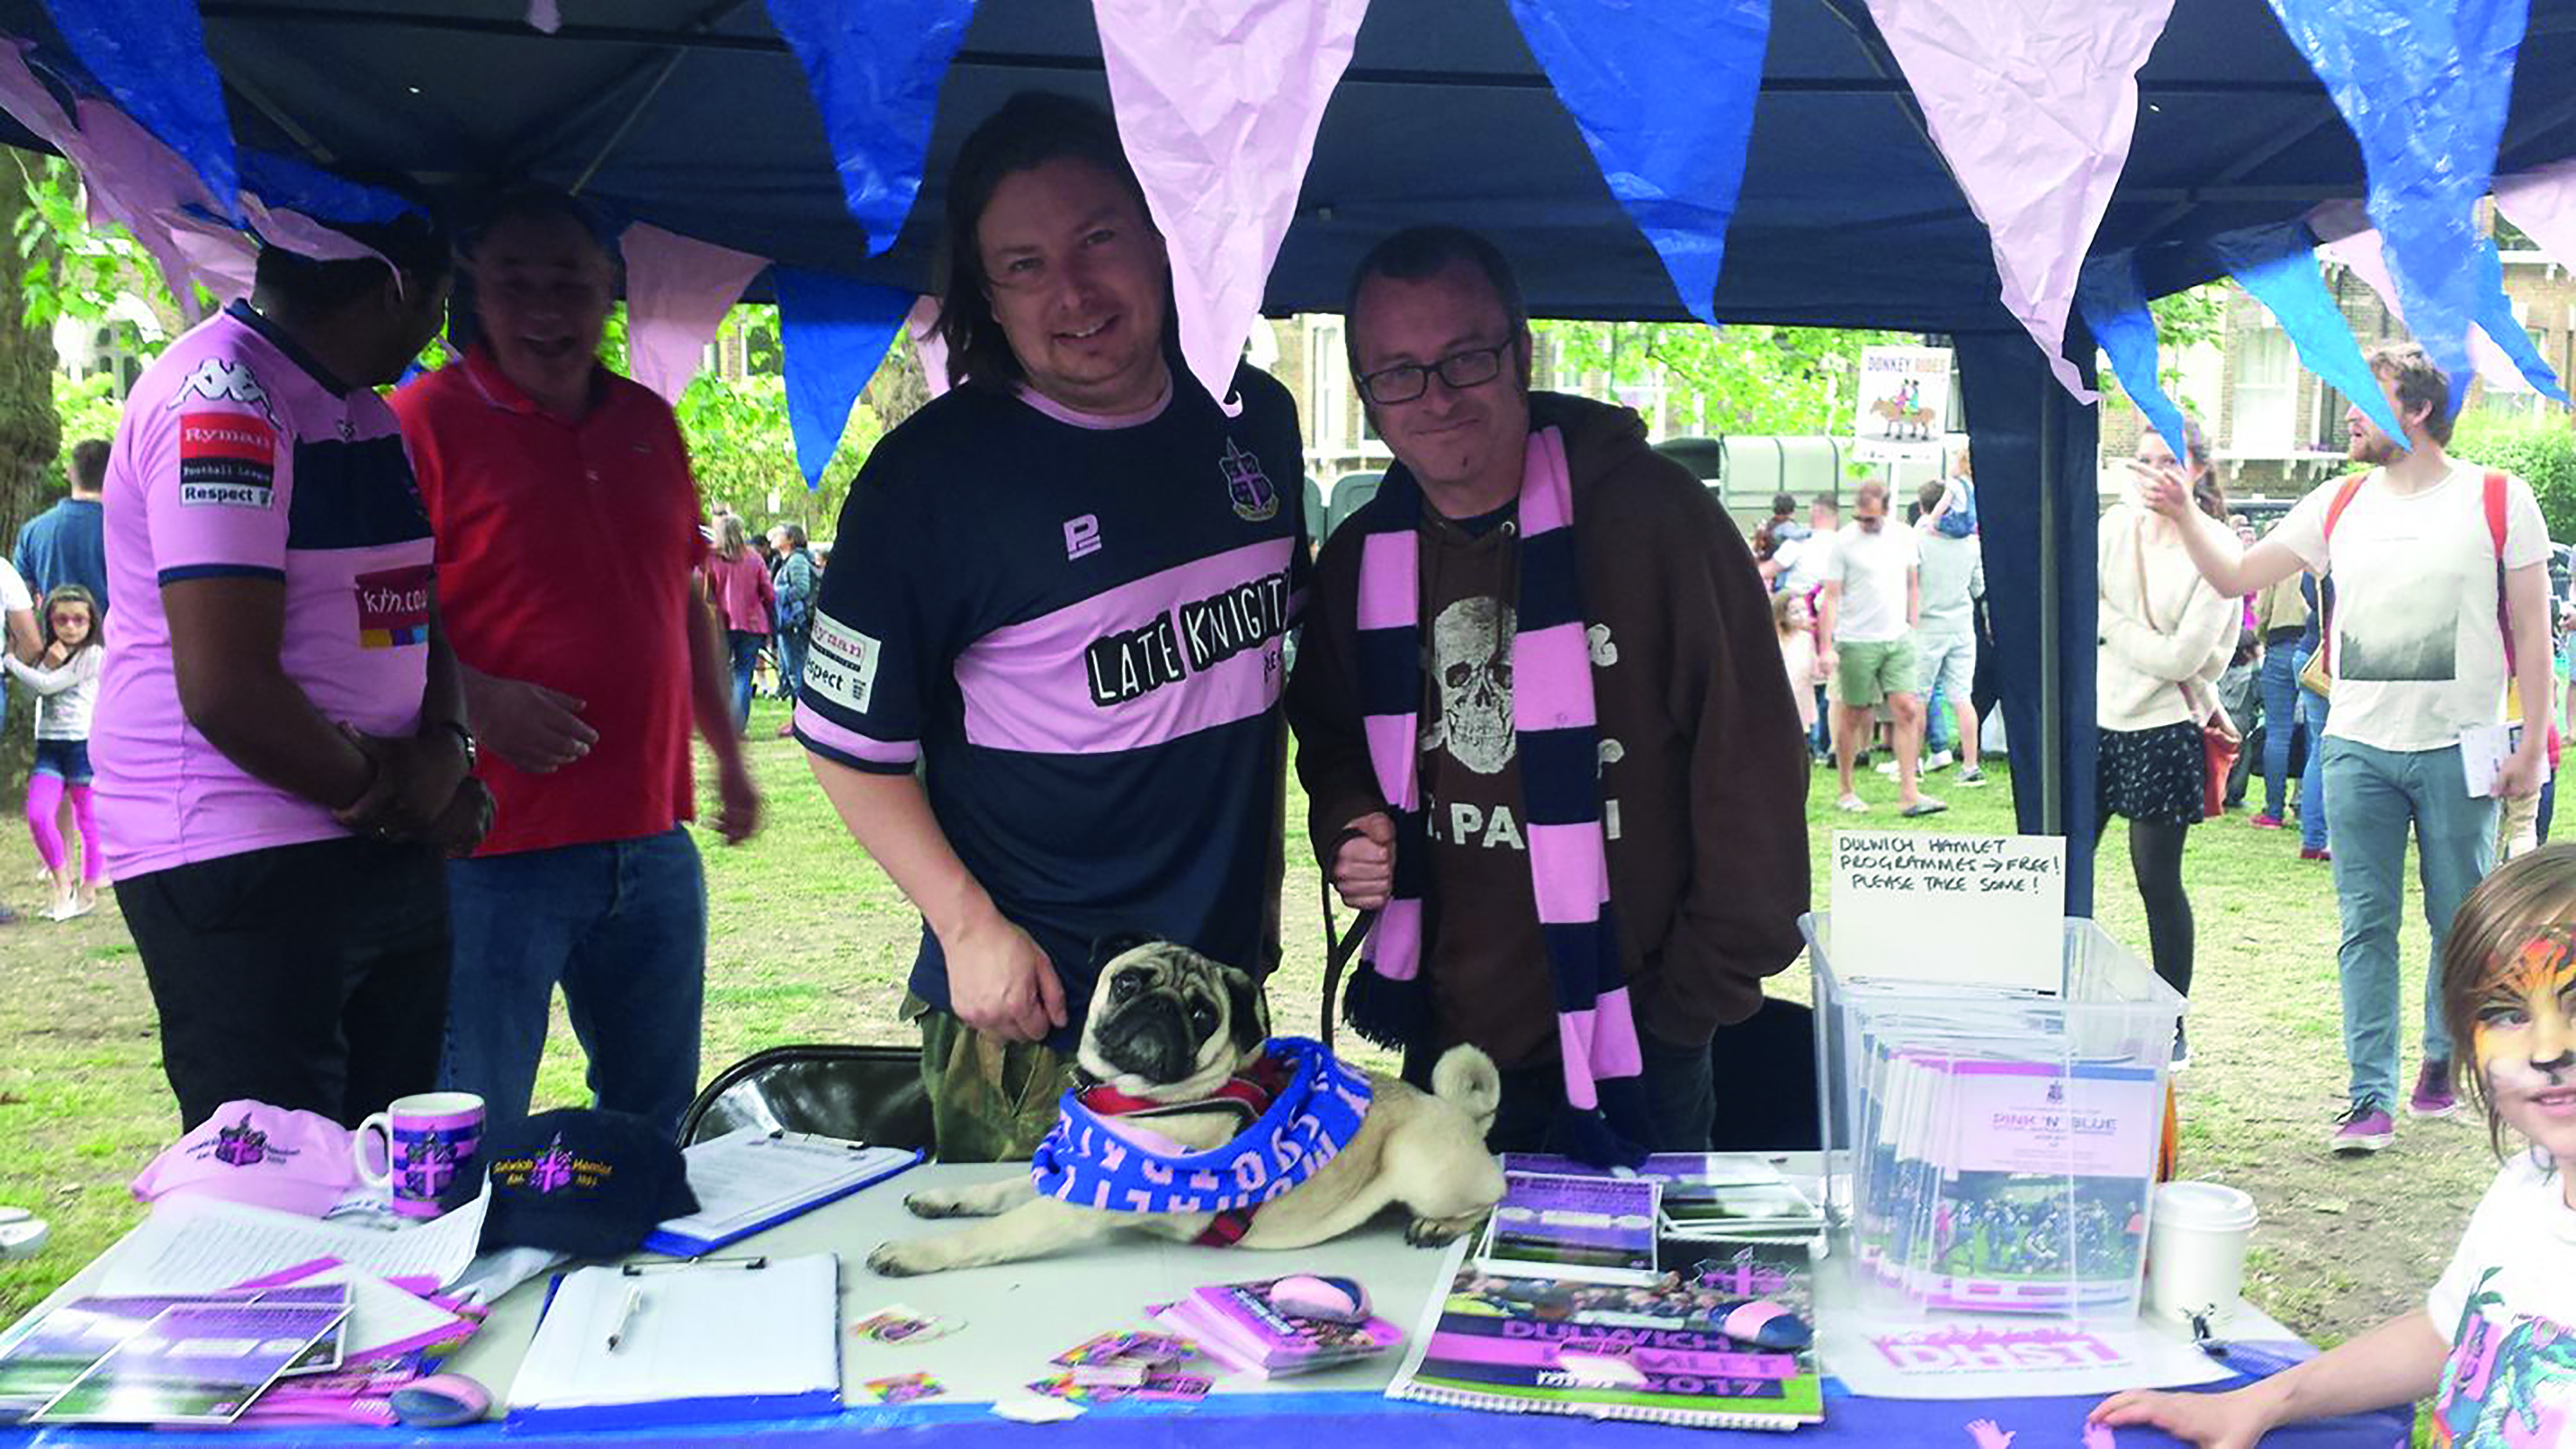 Dulwich Hamlet Football Club News from the Supporters’ Trust